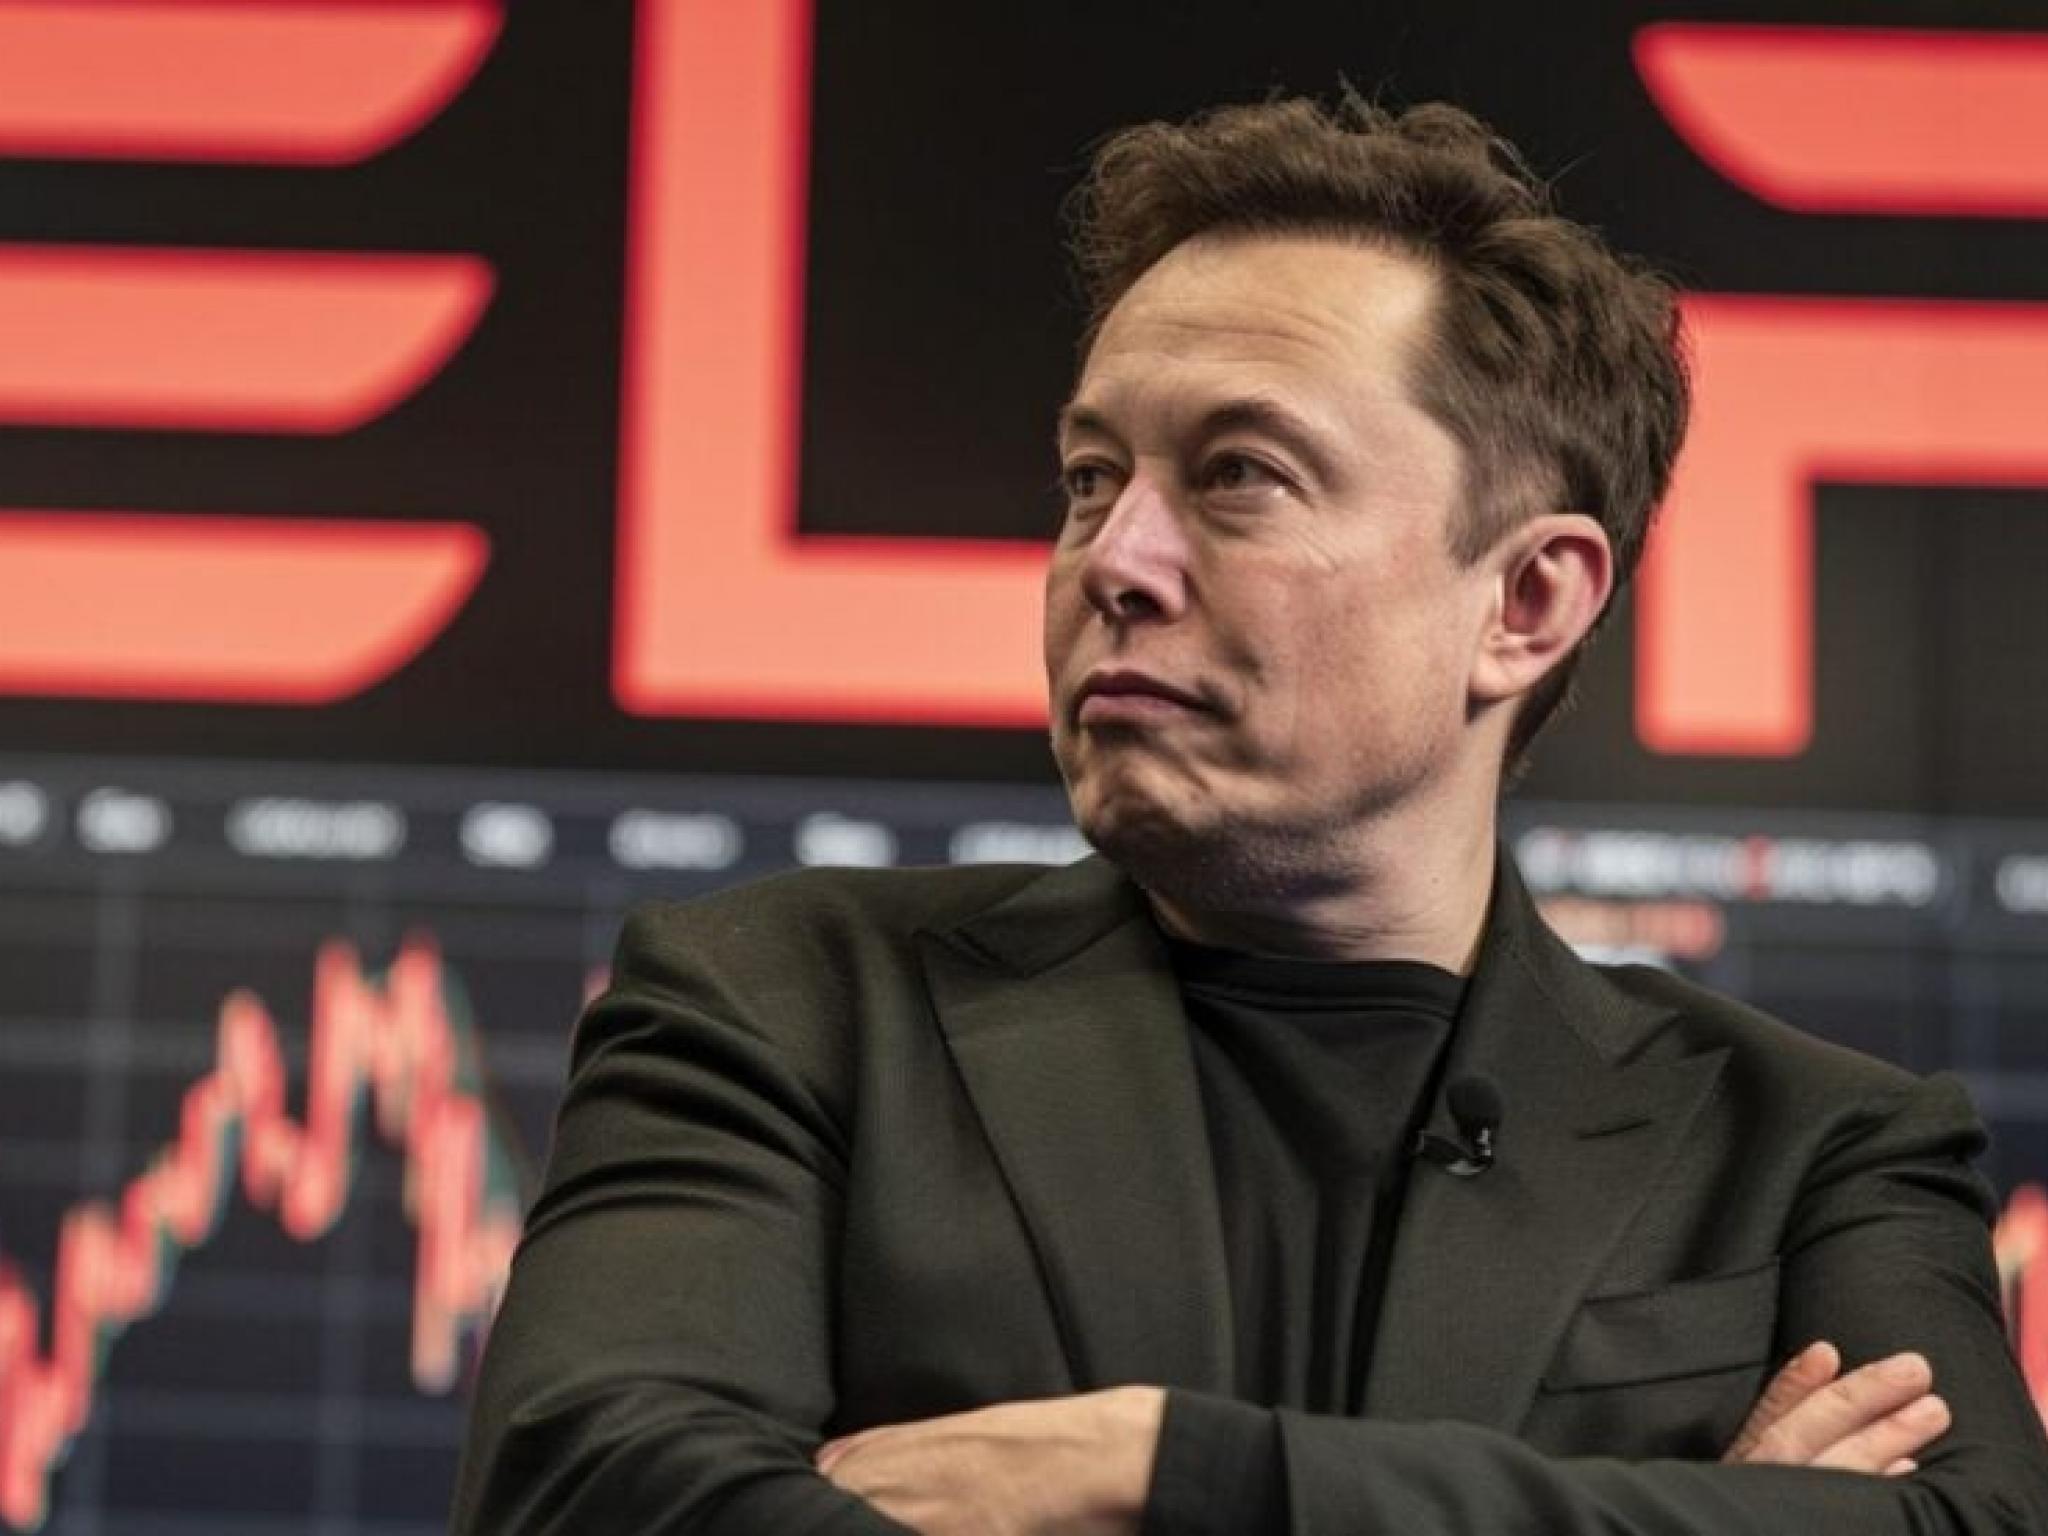  elon-musks-56b-payday-wins-in-landslide-next-chapter-in-the-tesla-growth-story 